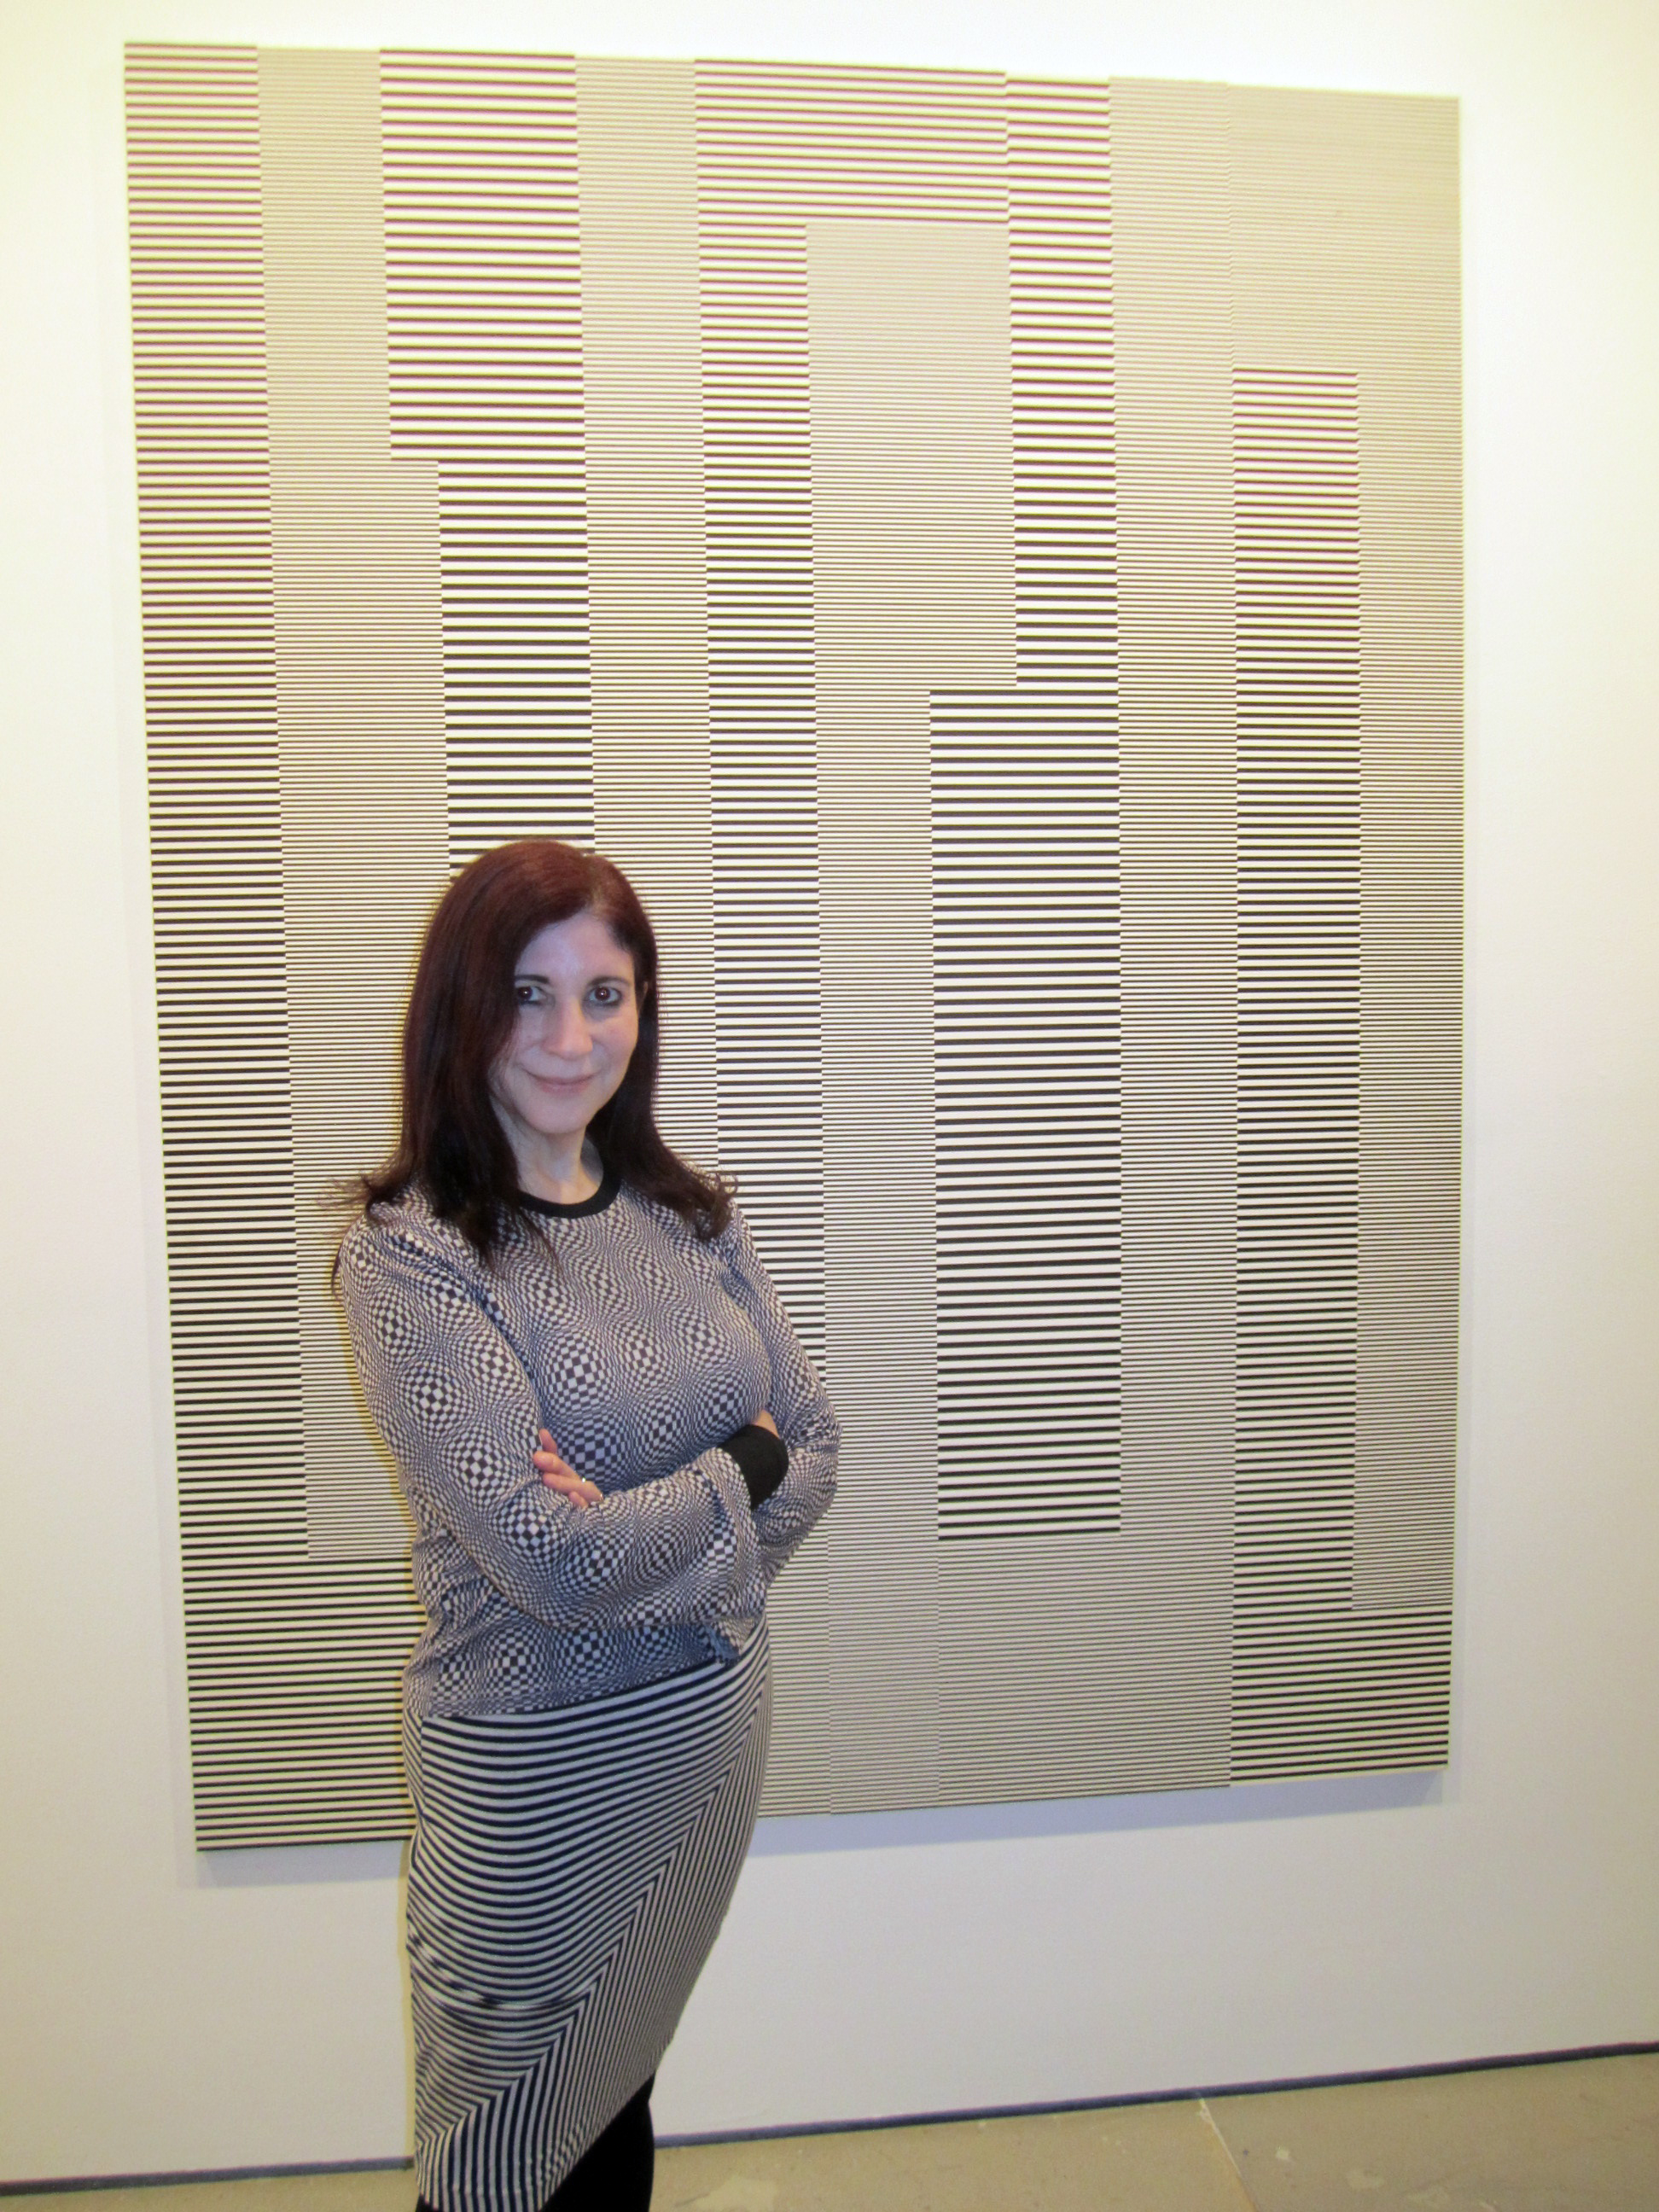 Elisa at the Mike Scott opening at Gering-Lopez Gallery on 5th Ave. in NYC.